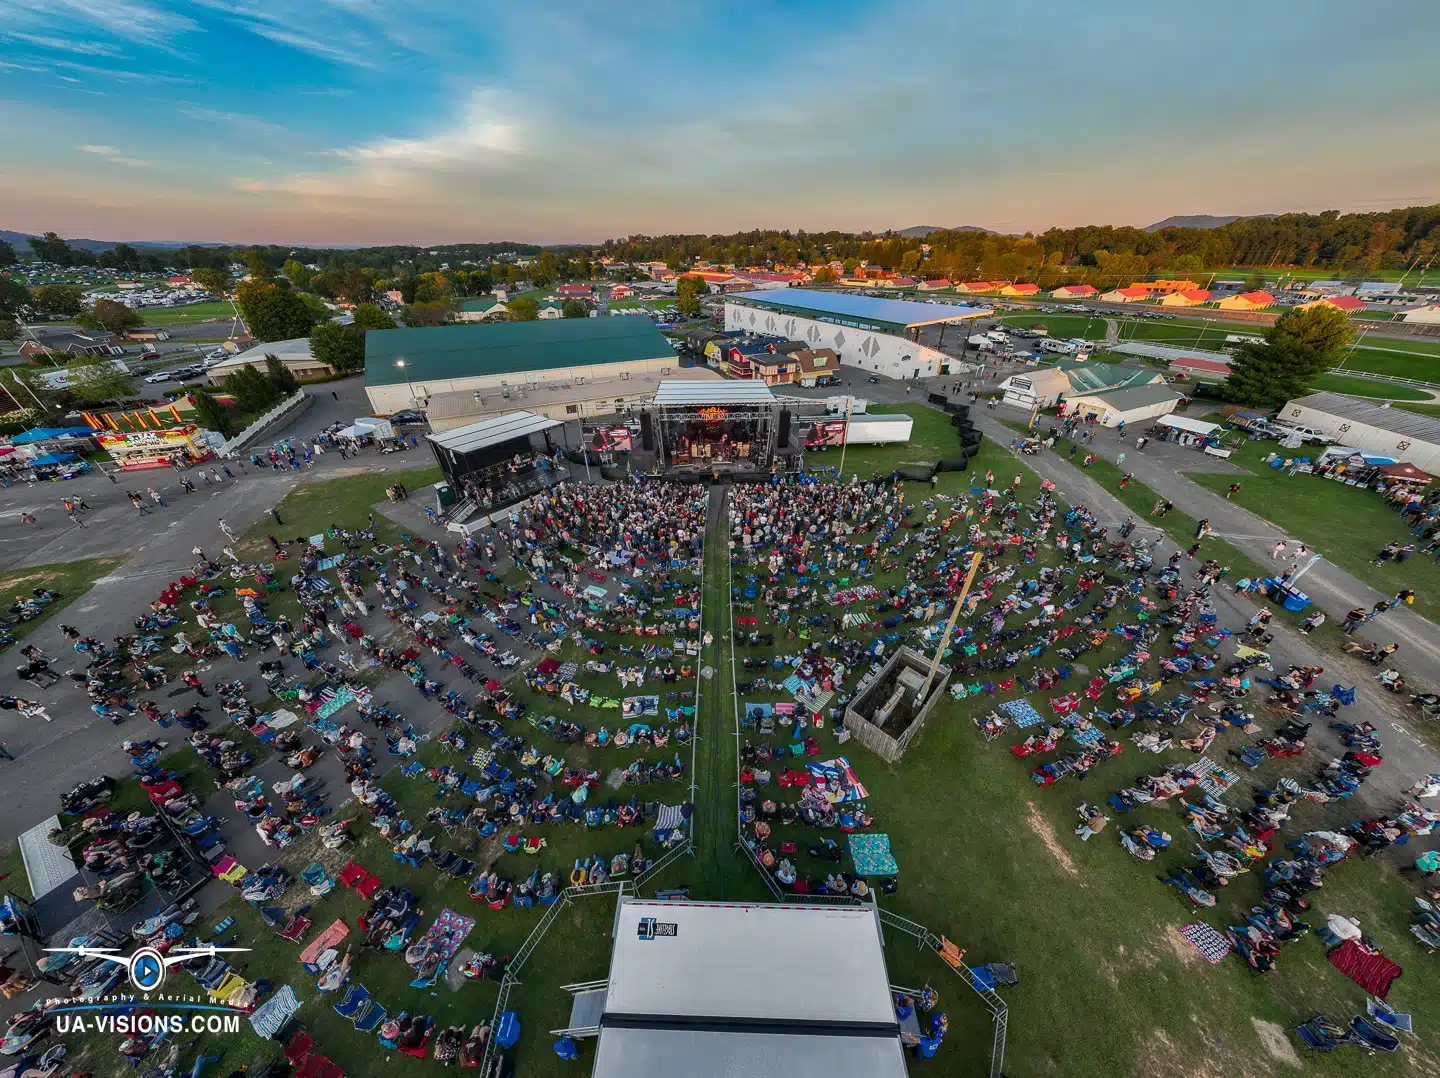 Aerial view of the Healing Appalachia festival crowd, as the sun sets on a day of music and community.